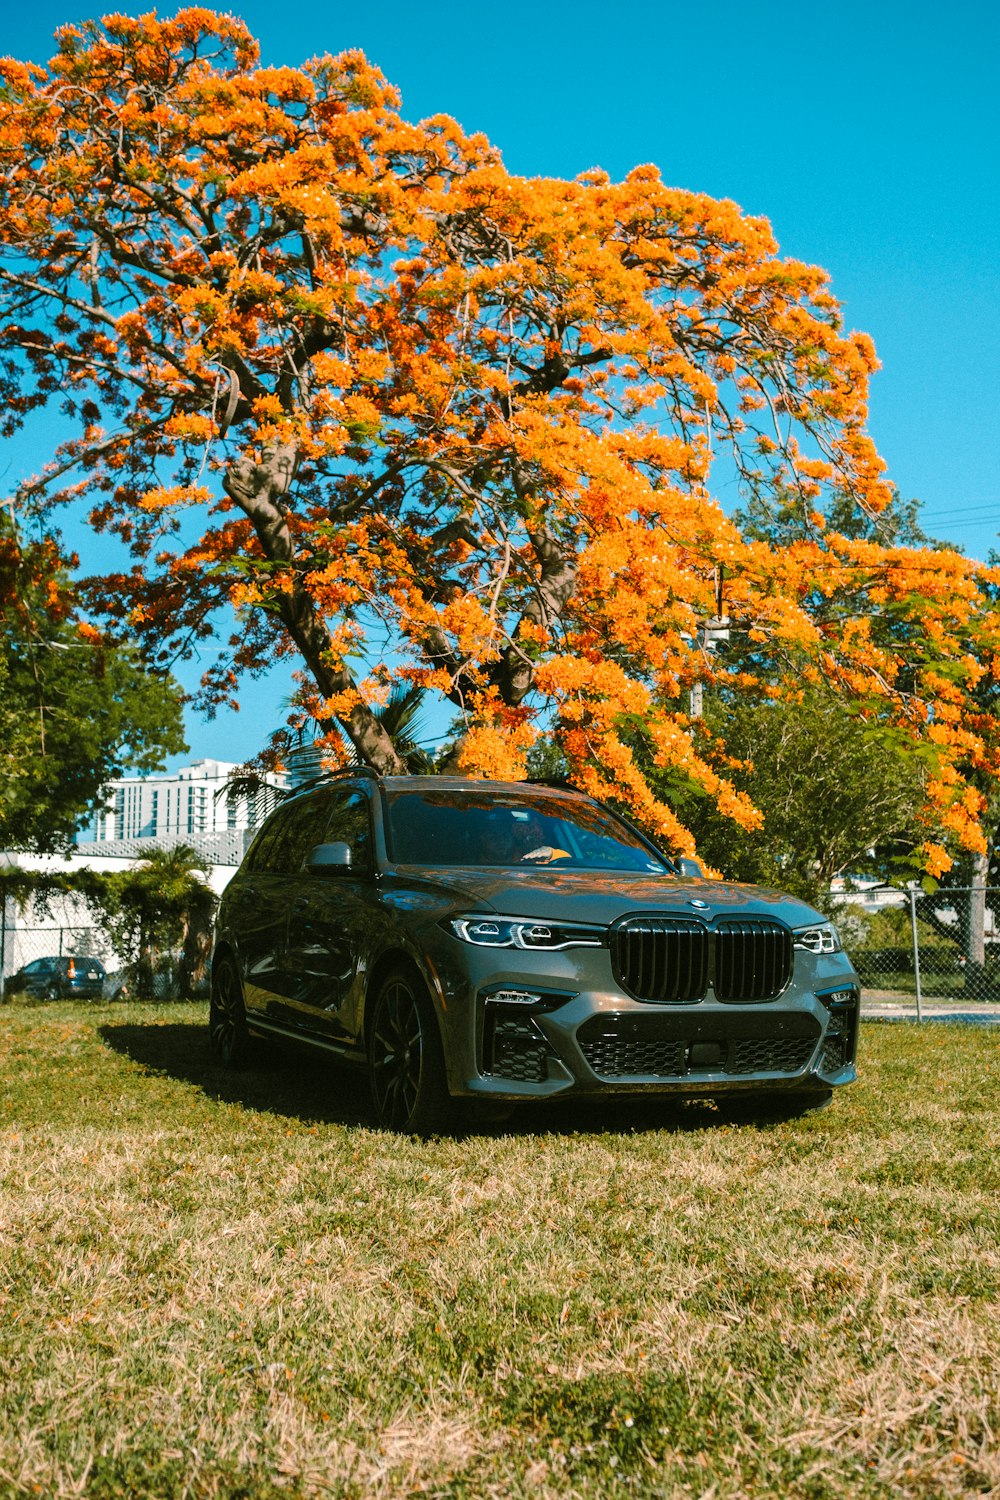 a black car parked in front of a tree with orange flowers